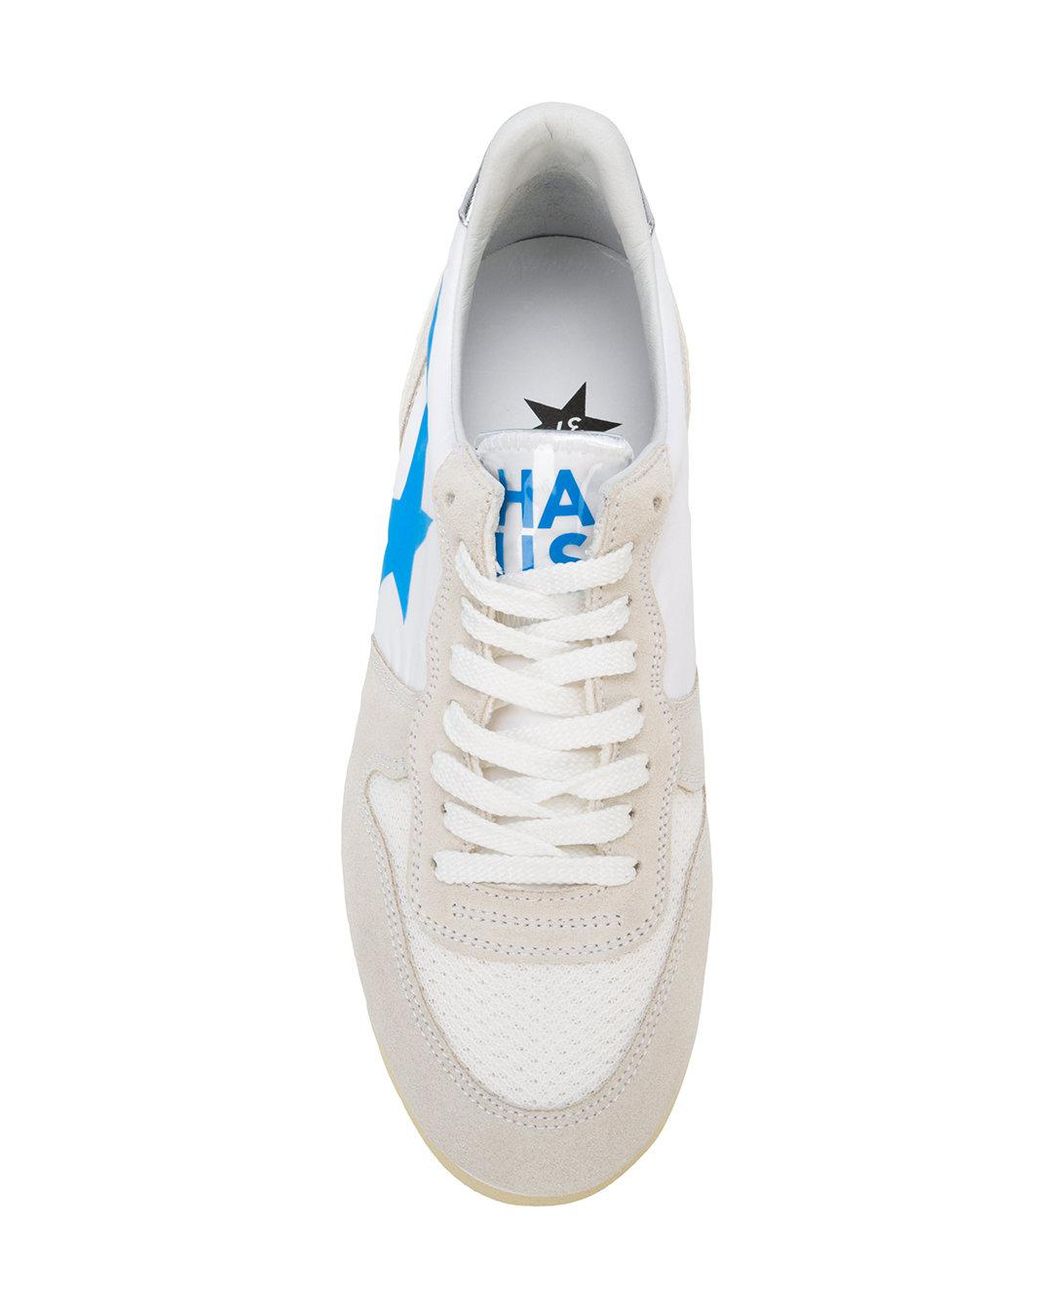 Haus By Golden Goose Deluxe Brand Haus Swan Sneakers White | Lyst